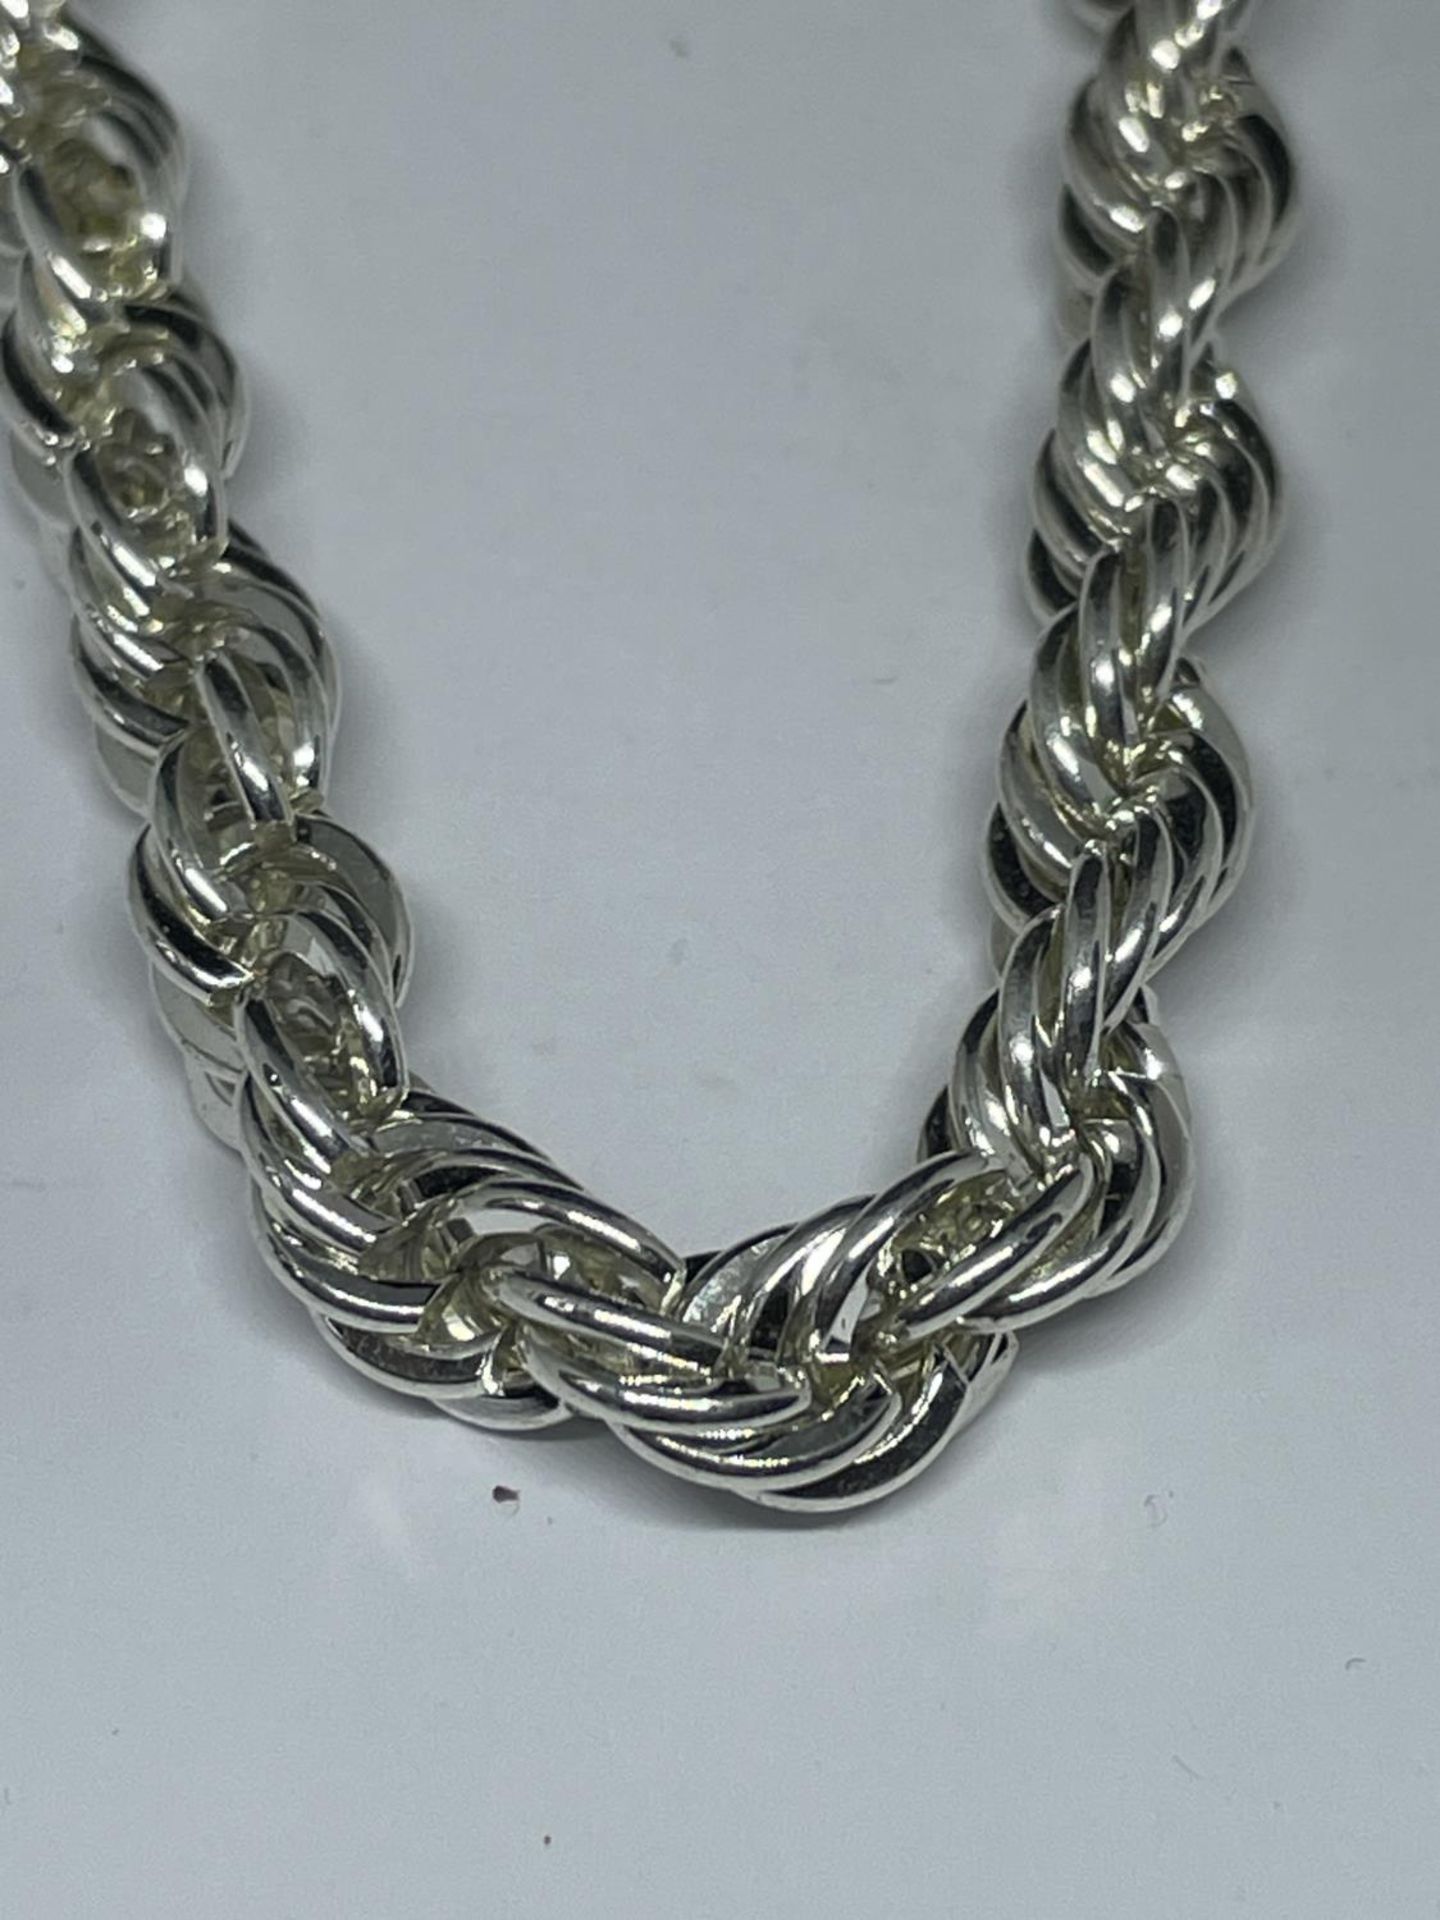 A SILVER WRIST CHAIN - Image 2 of 3